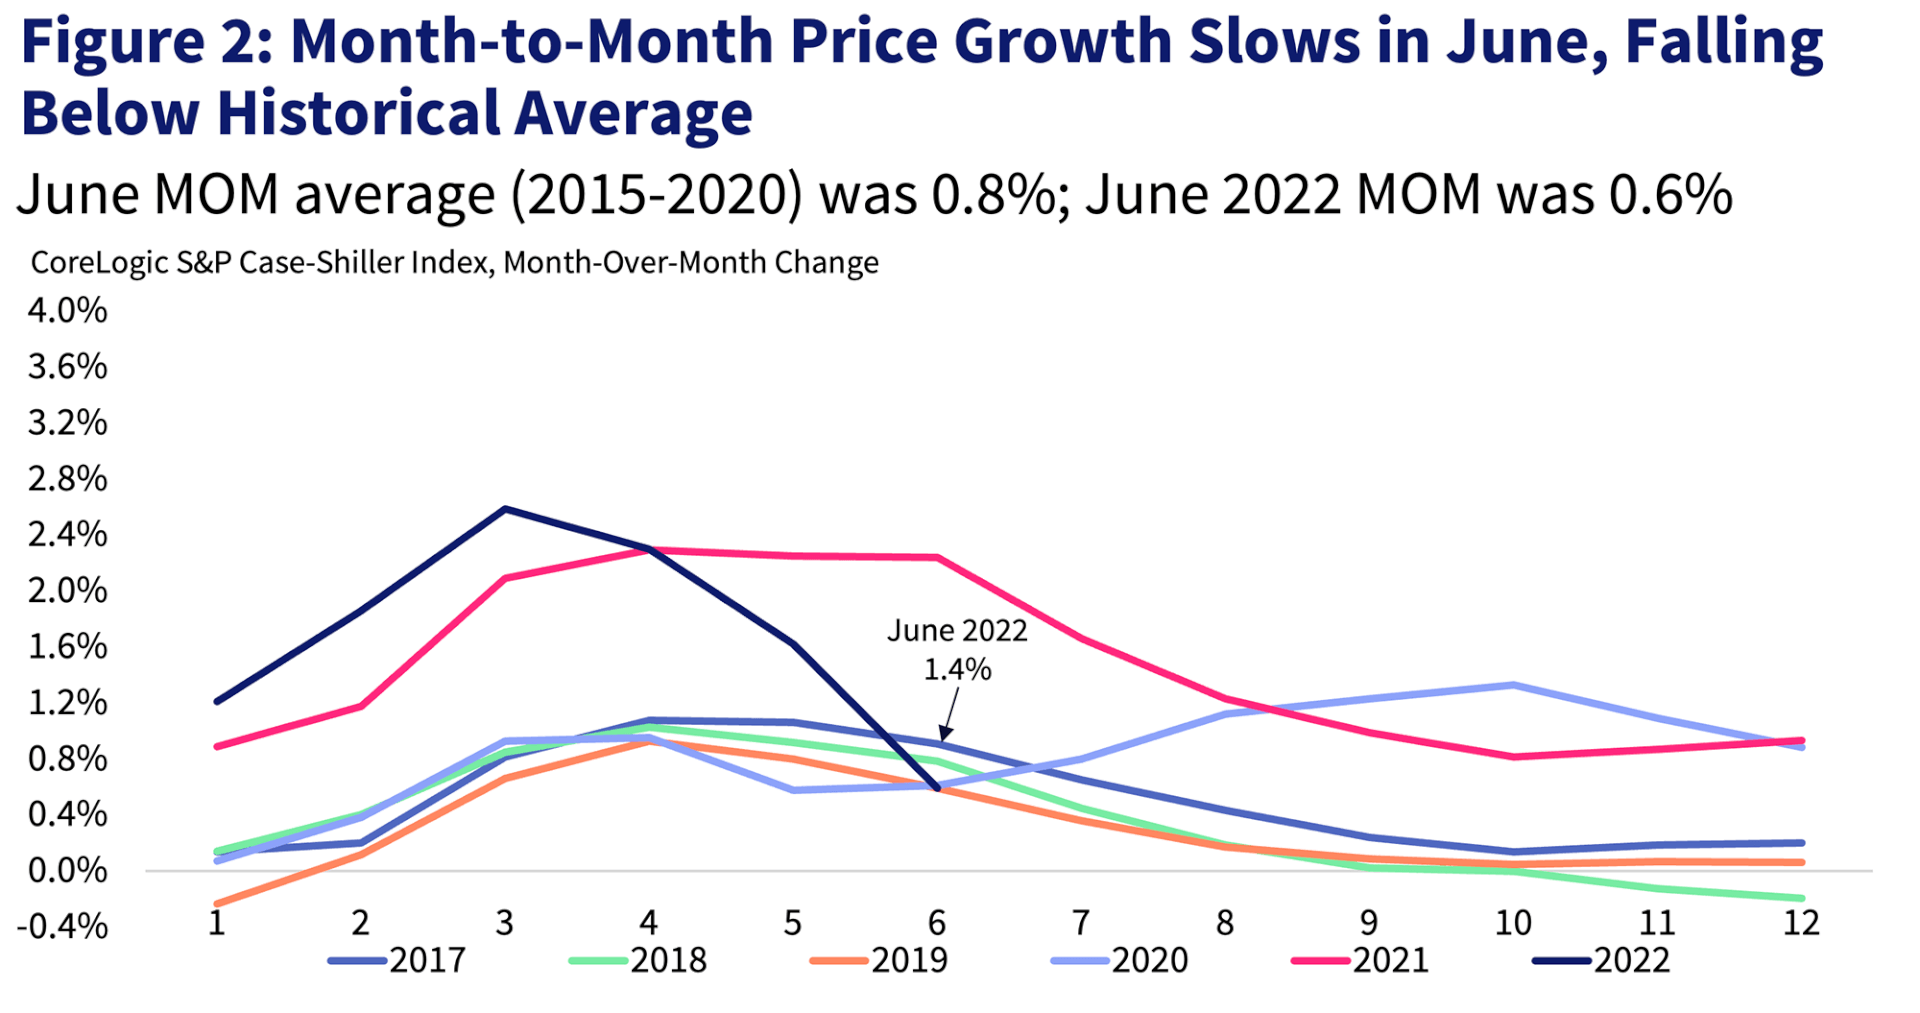 Figure 2: Month-to-Month Price Growth Declines in July, First Time Since Late 2018